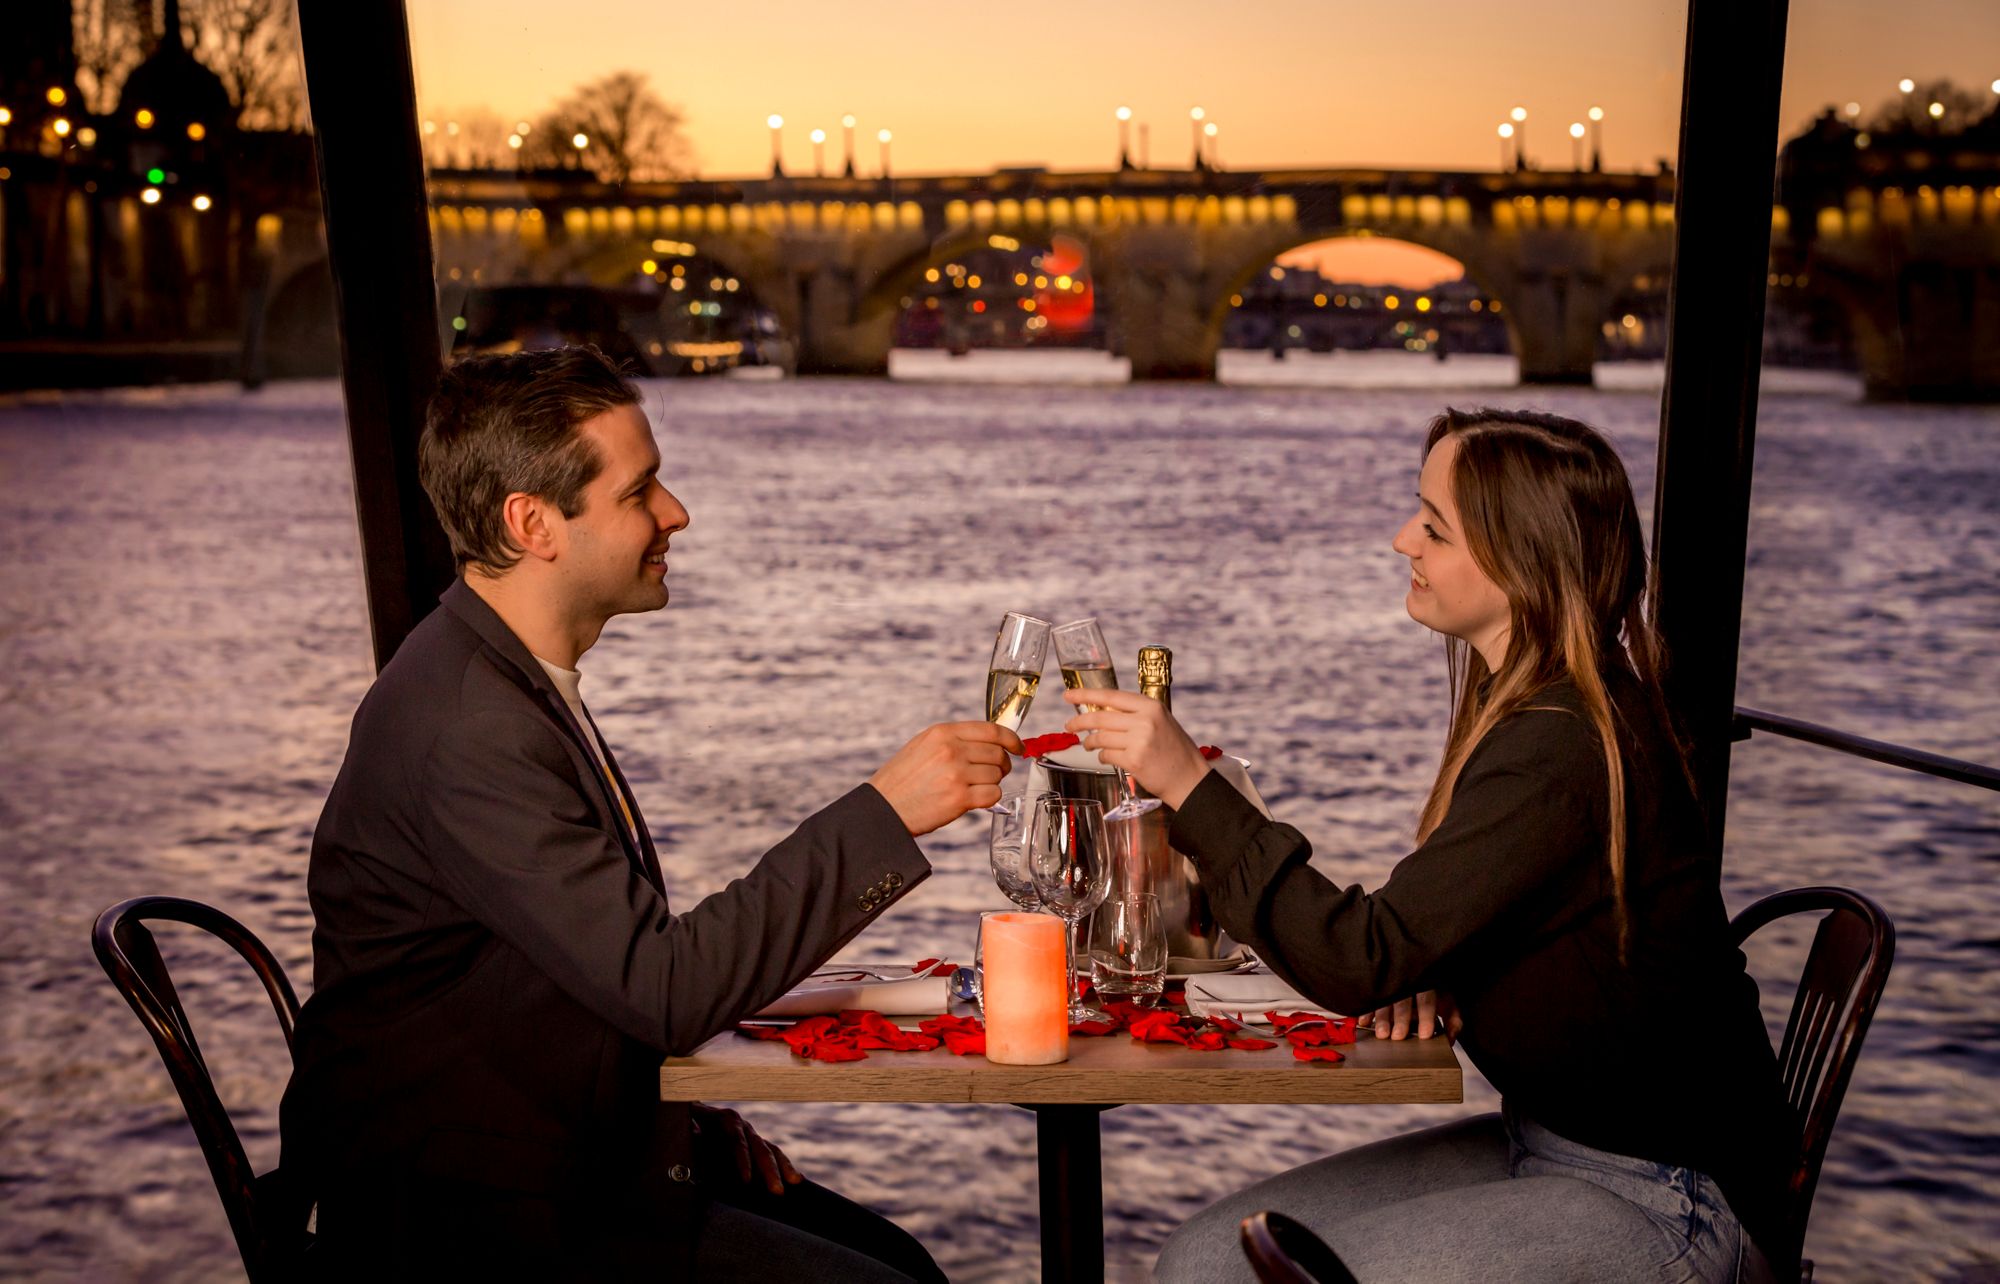 Seine Dinner Cruise 6 PM, ascent to the Eiffel Tower and Moulin Rouge Show with 1 Glass of Champagne